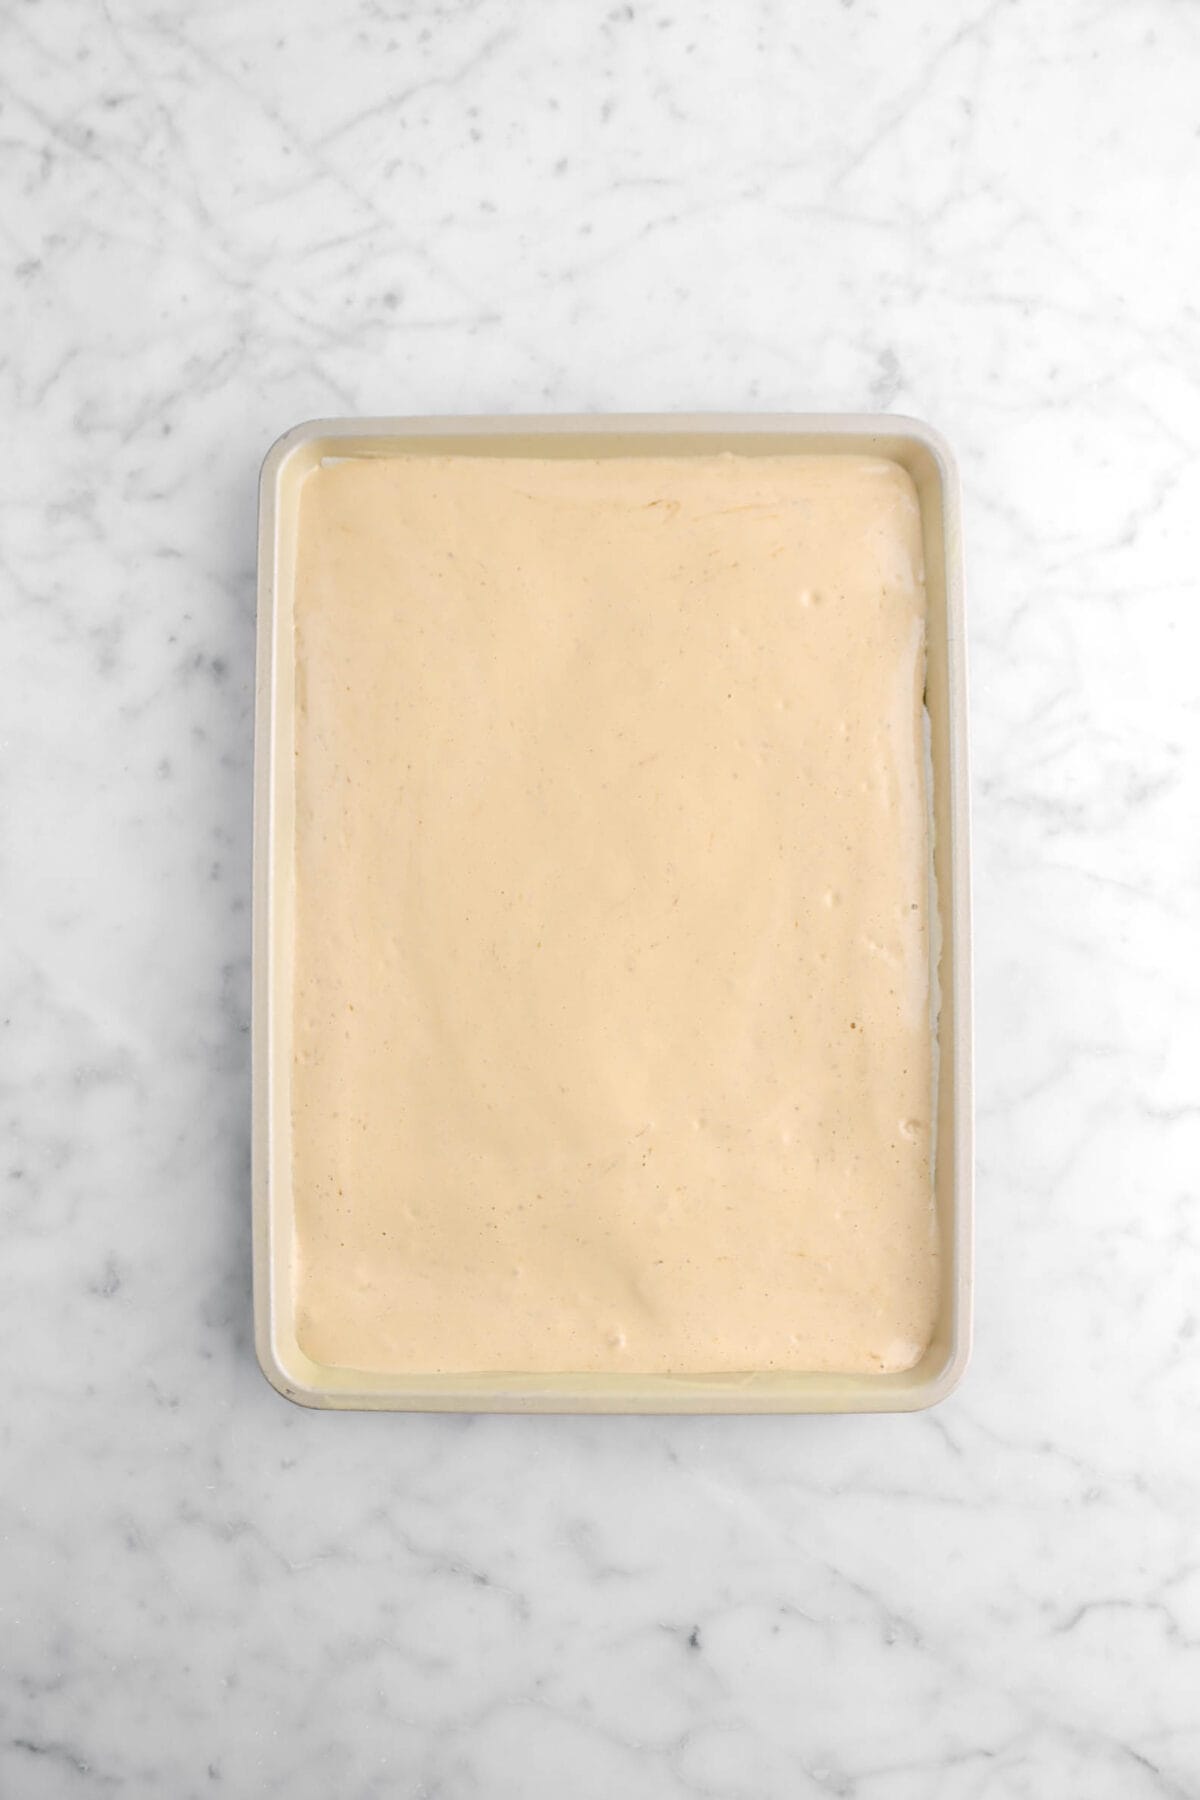 genoise batter in gold sheet pan on marble surface.